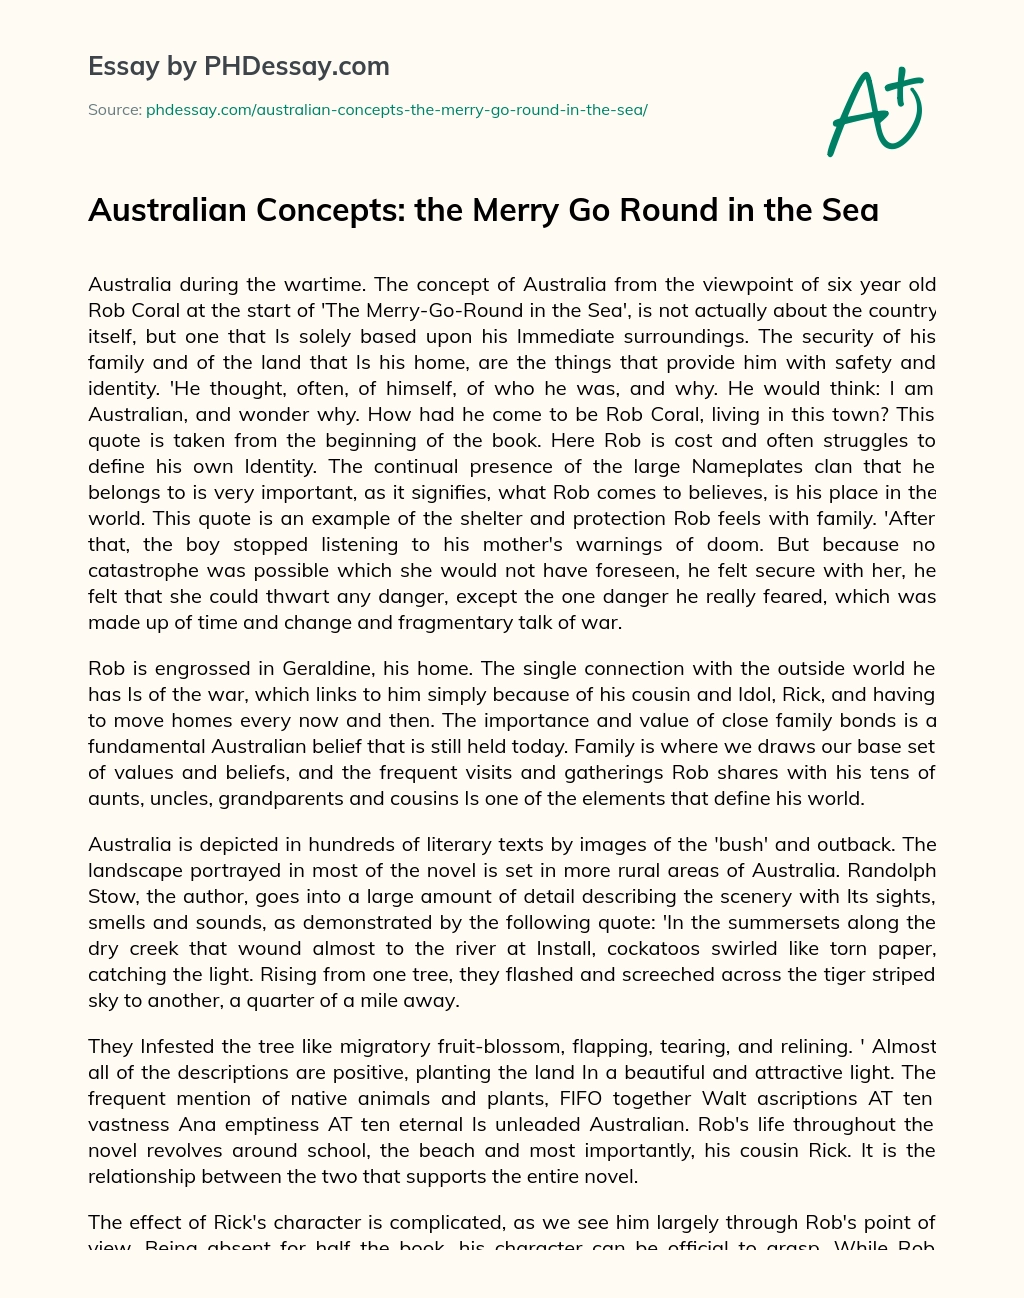 Australian Concepts: the Merry Go Round in the Sea essay